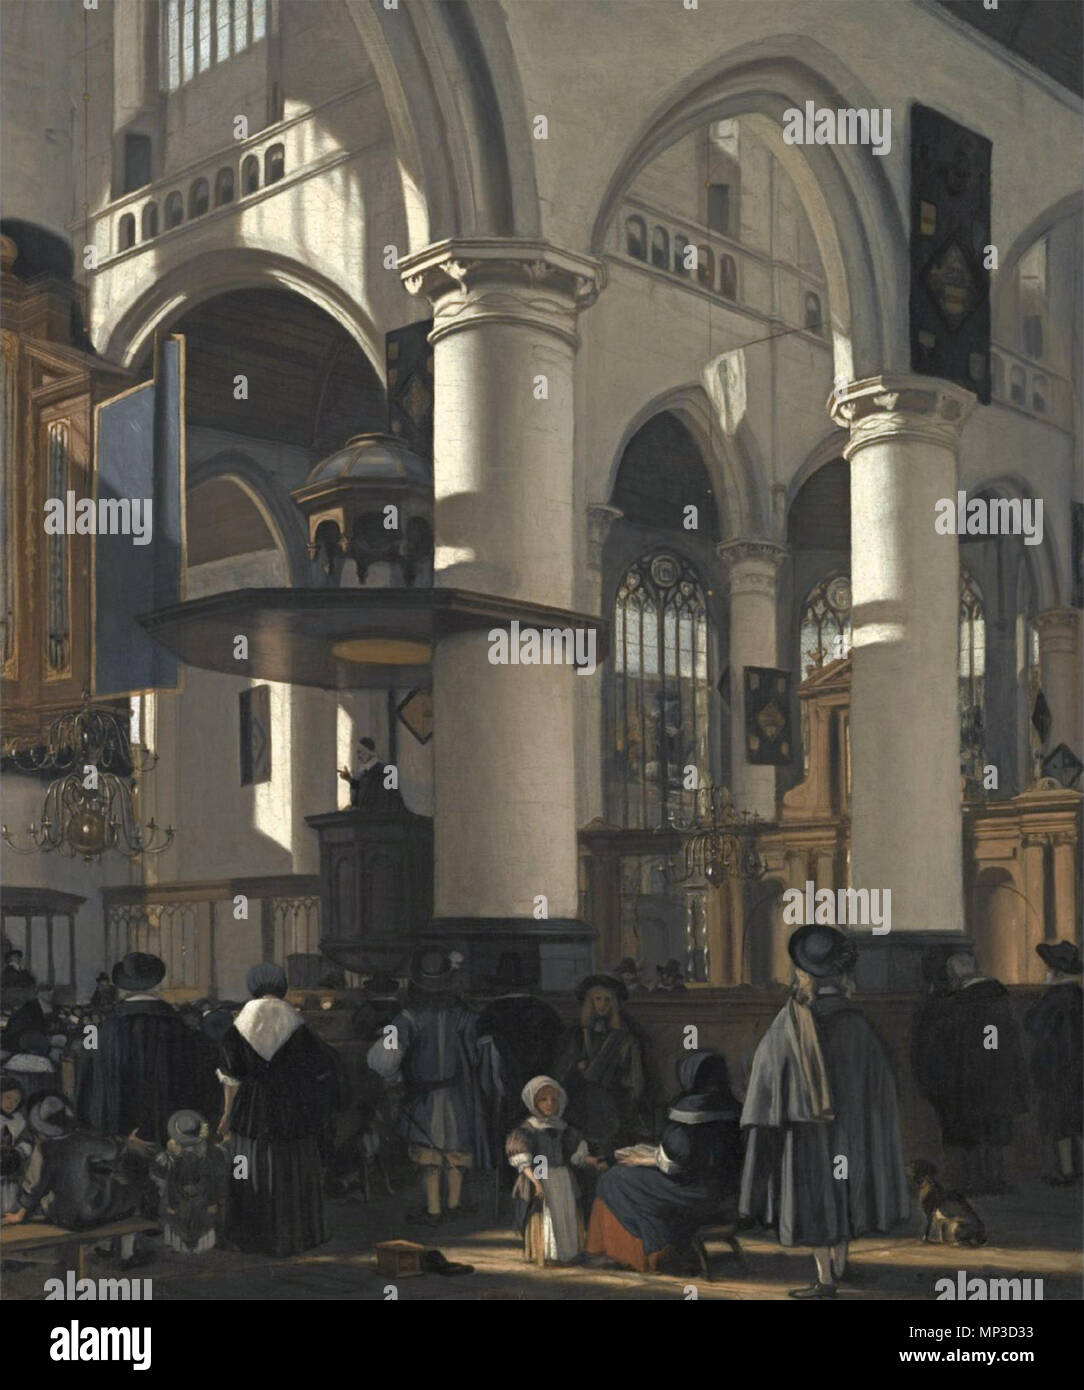 The interior of the Oude Kerk in Delft, from the south aisle to the crossing, towards the north-east, during the preaching of a sermon    . The interior of the Oude Kerk in Delft, from the south aisle to the crossing, towards the north-east, during the preaching of a sermon . 1669.   Emanuel de Witte  (1617–1692)     Alternative names Emanuel de Widt; Manuel de Widt; Emanuel de Wit; Manuel de Wit; Emanuel de With; Manuel de With; Emanuel de Witt; Manuel de Witt; Manuel de Witte  Description Dutch painter and draughtsman  Date of birth/death 1617 1692  Location of birth/death Alkmaar Amsterdam  Stock Photo